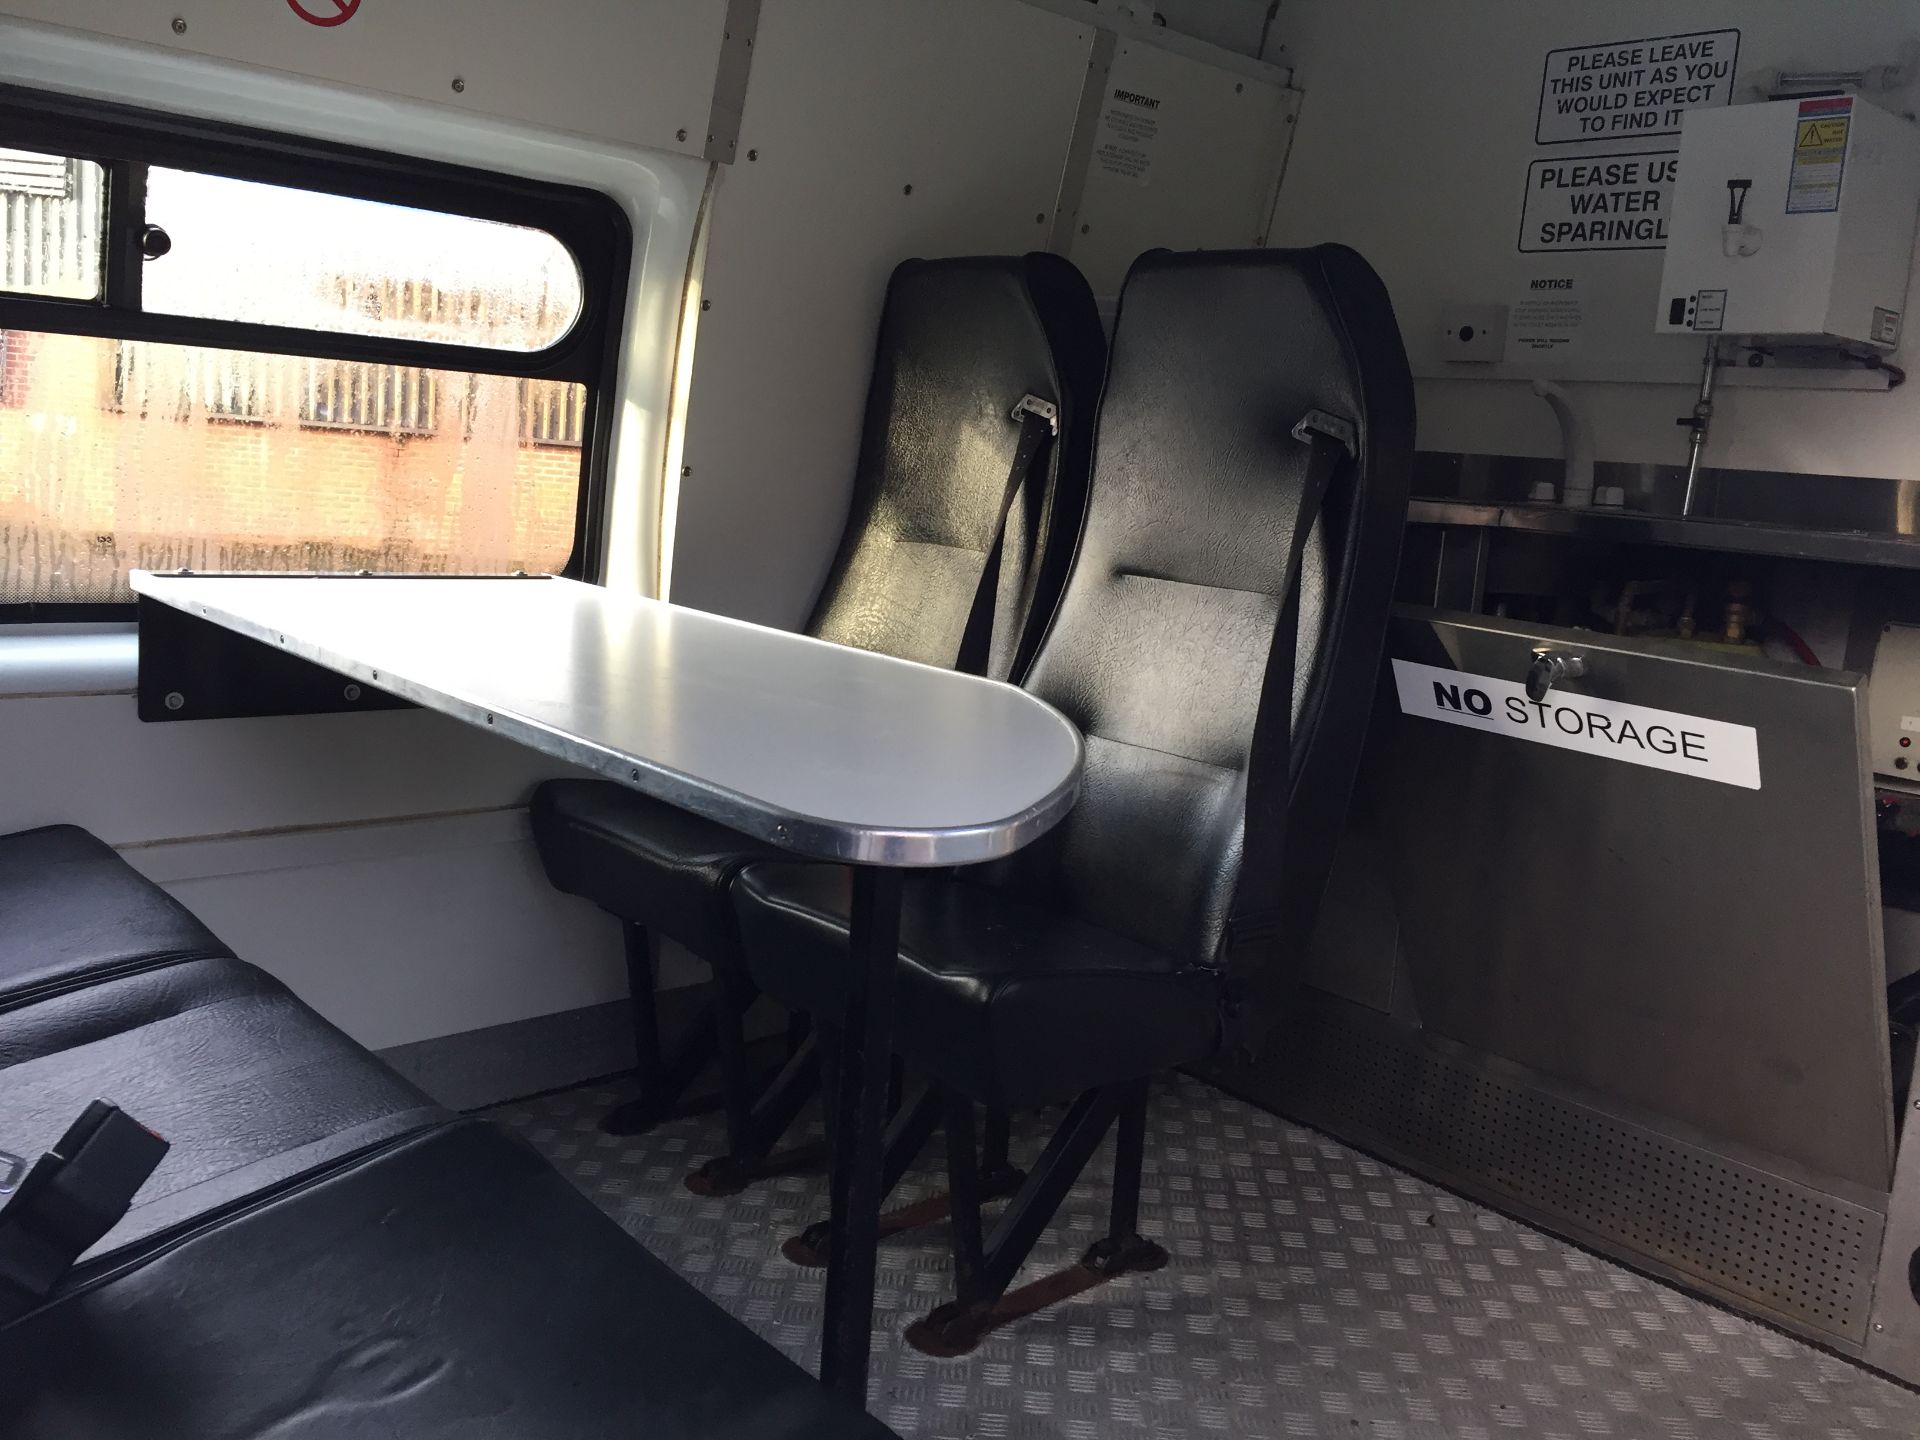 Ford Transit Welfare Van With Seating Area, Cooking Station and Toilet Ex-Commisioned Highway Mainte - Image 8 of 11